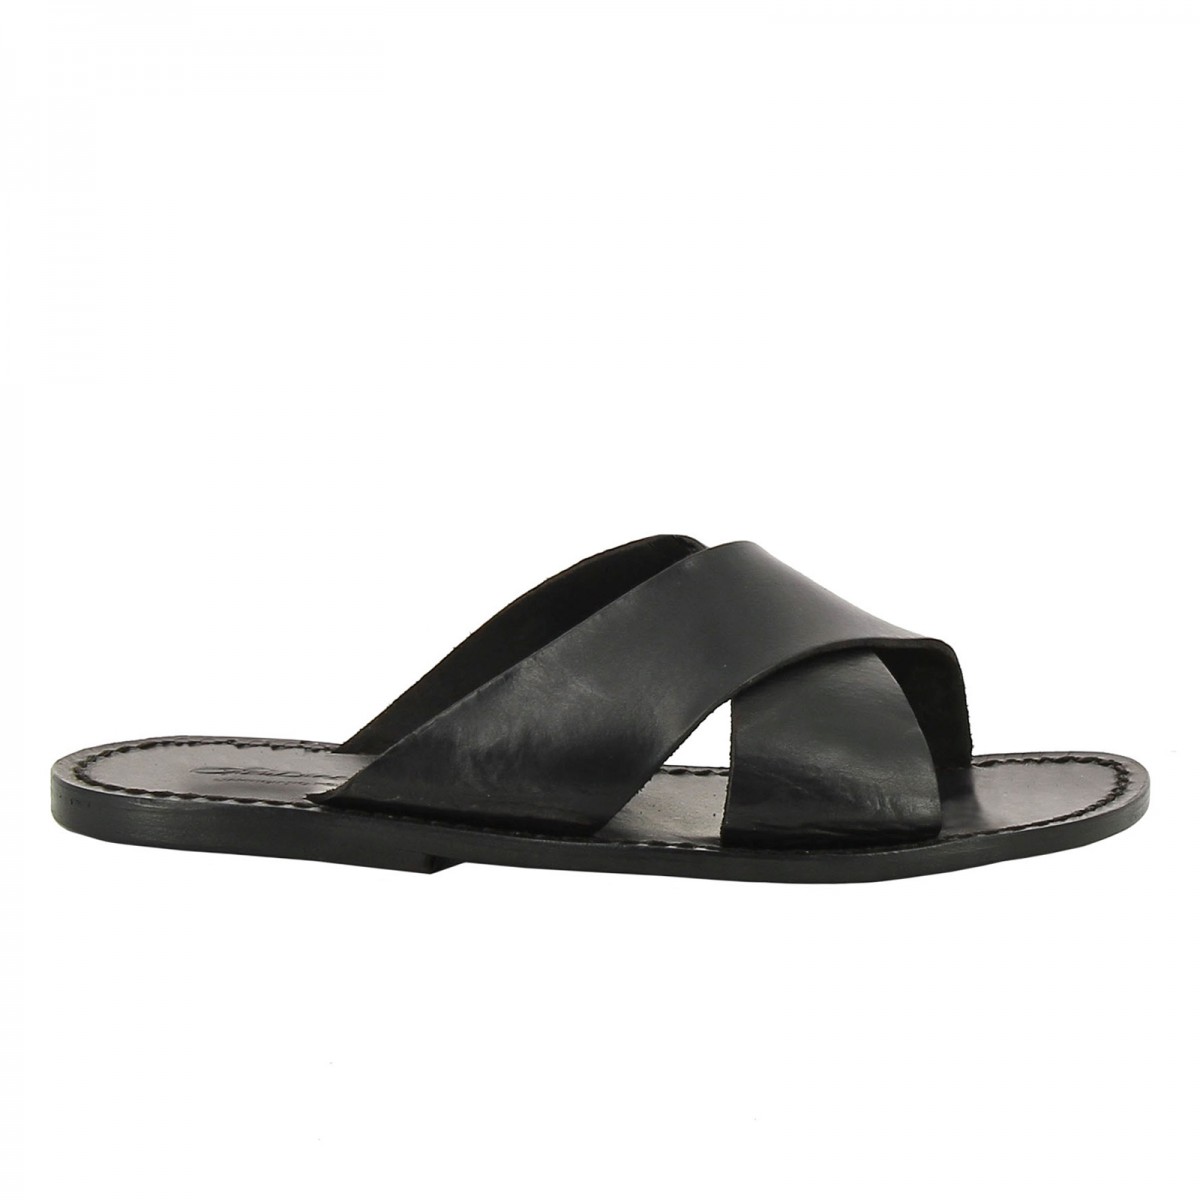 Mens leather slippers handmade in Italy in black leather | The leather ...